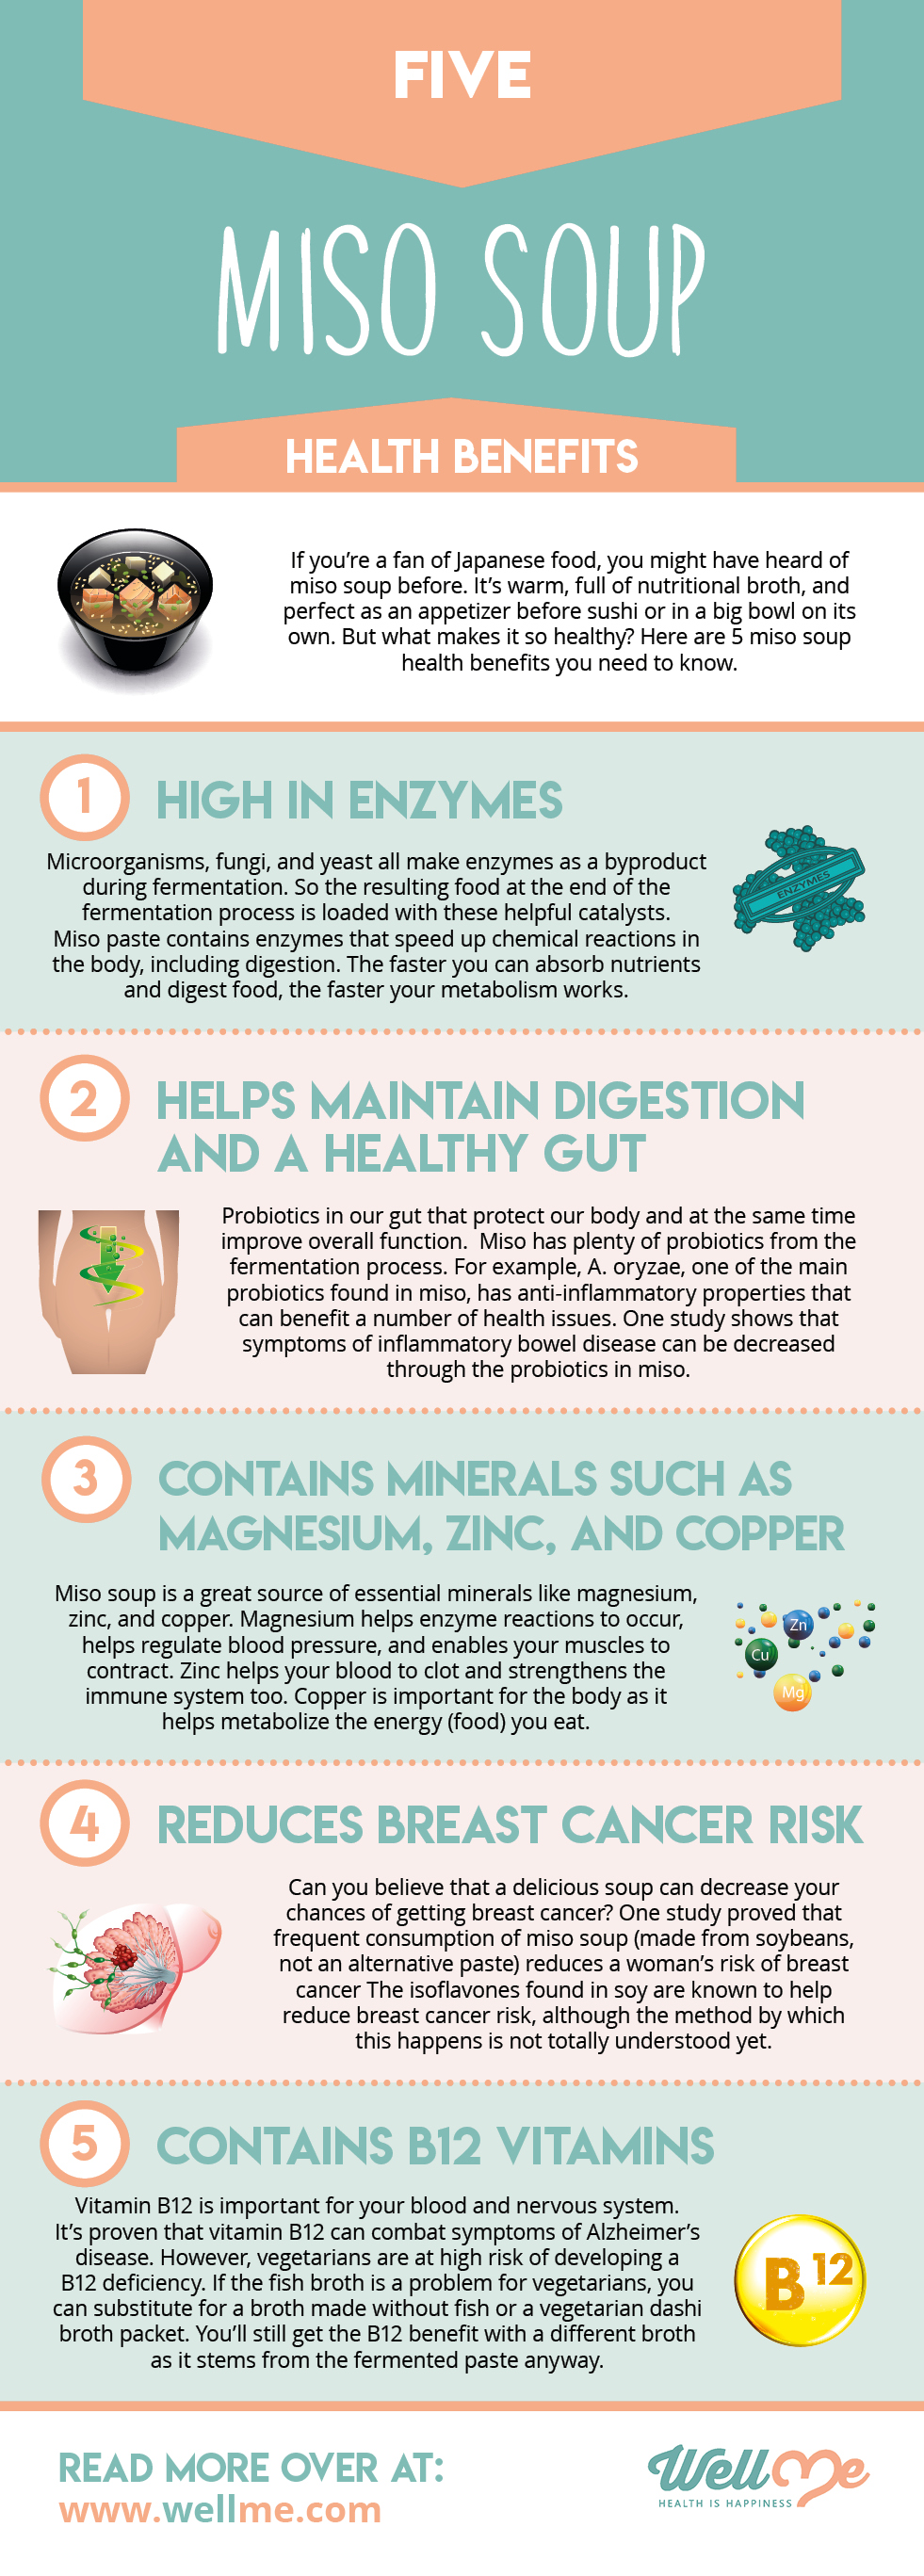 Five Miso Soup Health Benefits infographic